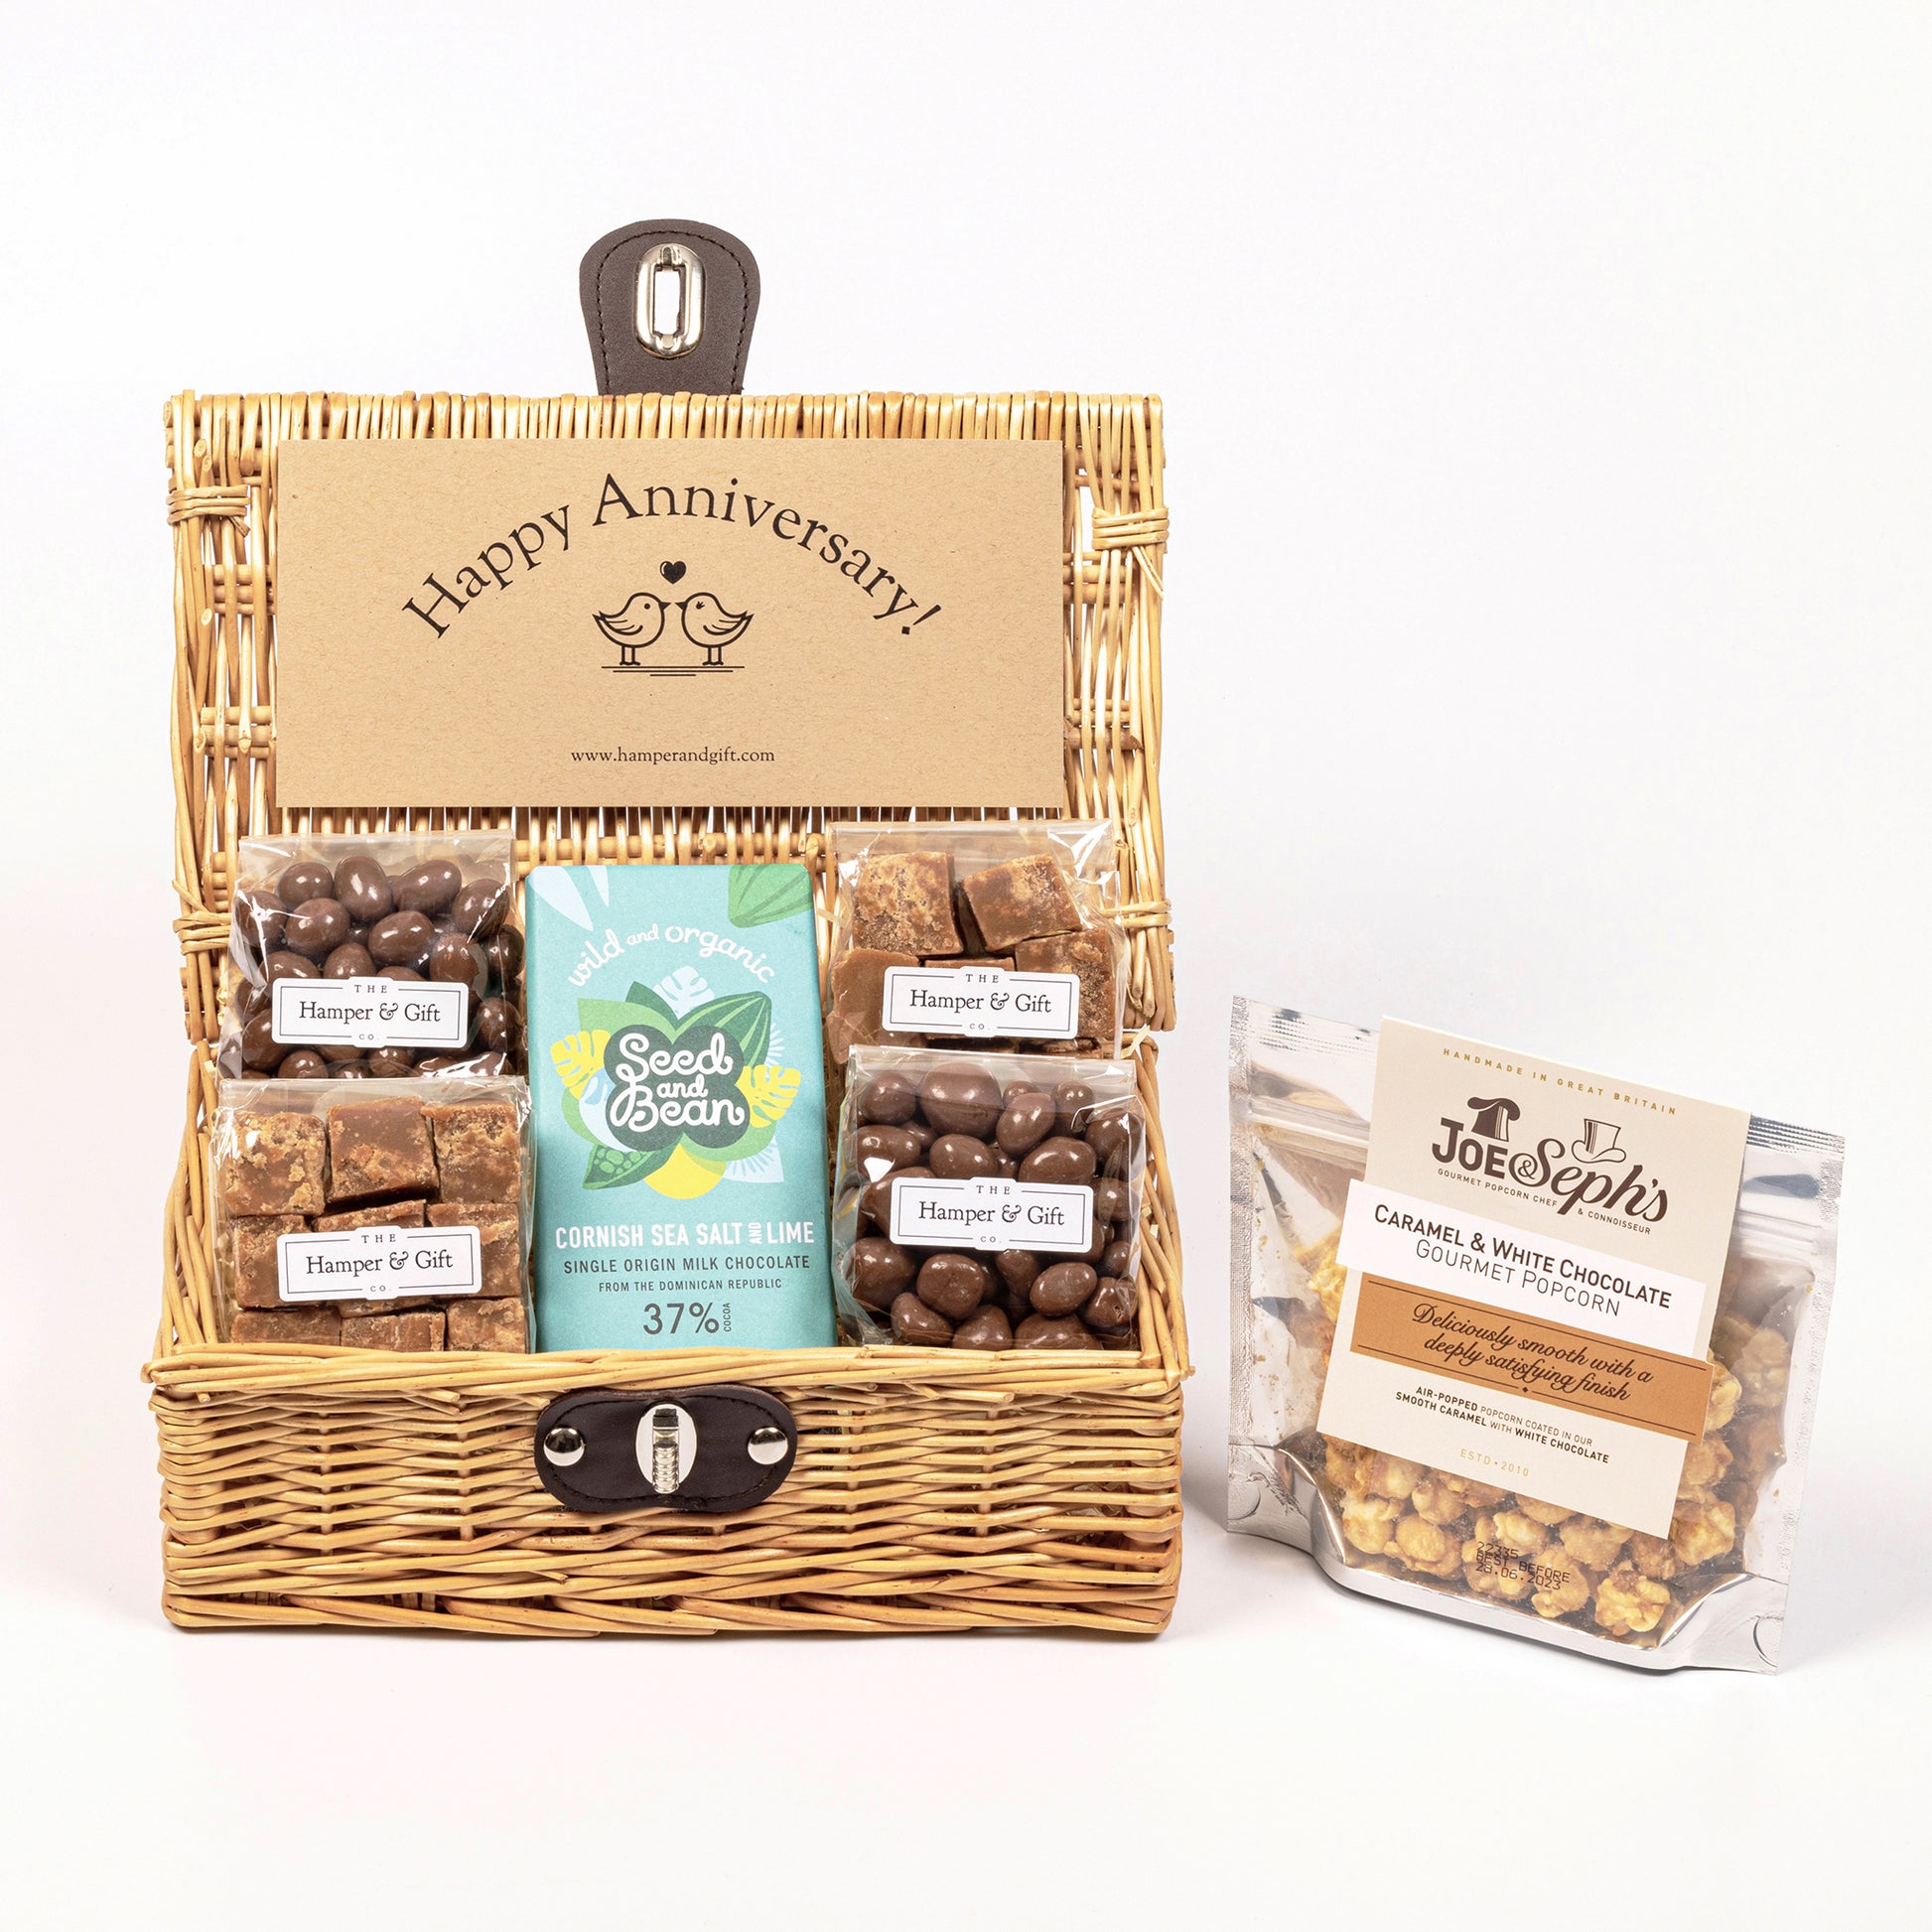 Little Anniversary Hamper filled with chocolate, fudge and gourmet popcorn